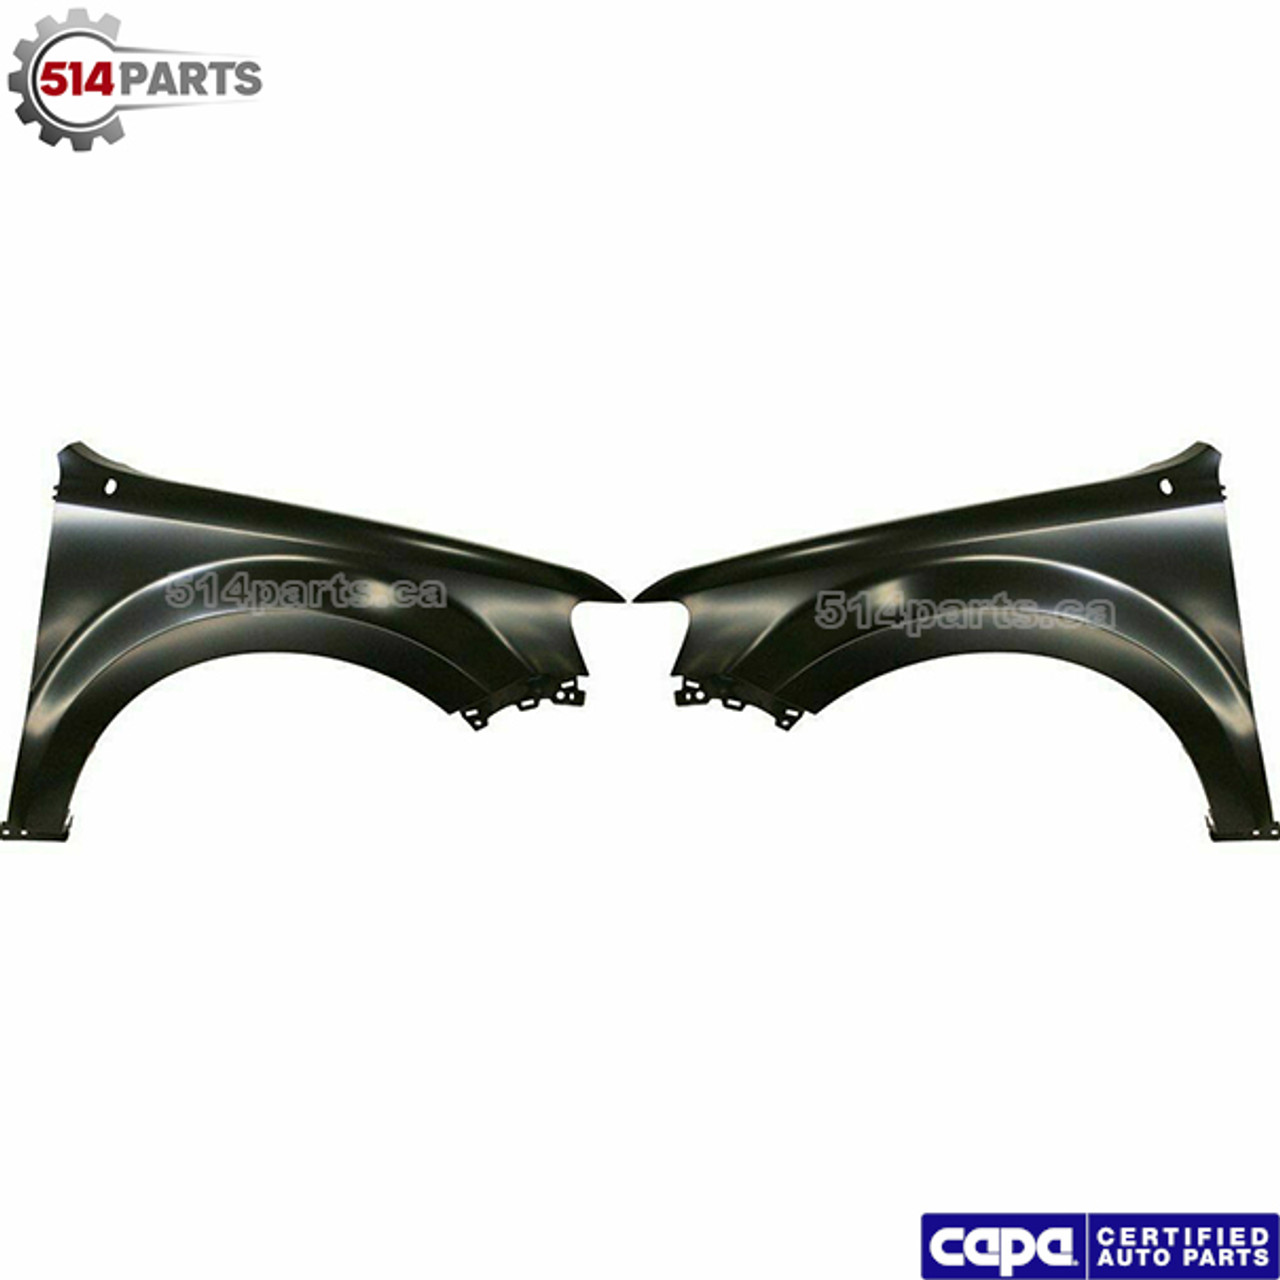 2008 - 2012 FORD ESCAPE and ESCAPE HYBRID FRONT FENDERS CAPA Certified - AILES AVANT Certifiee CAPA